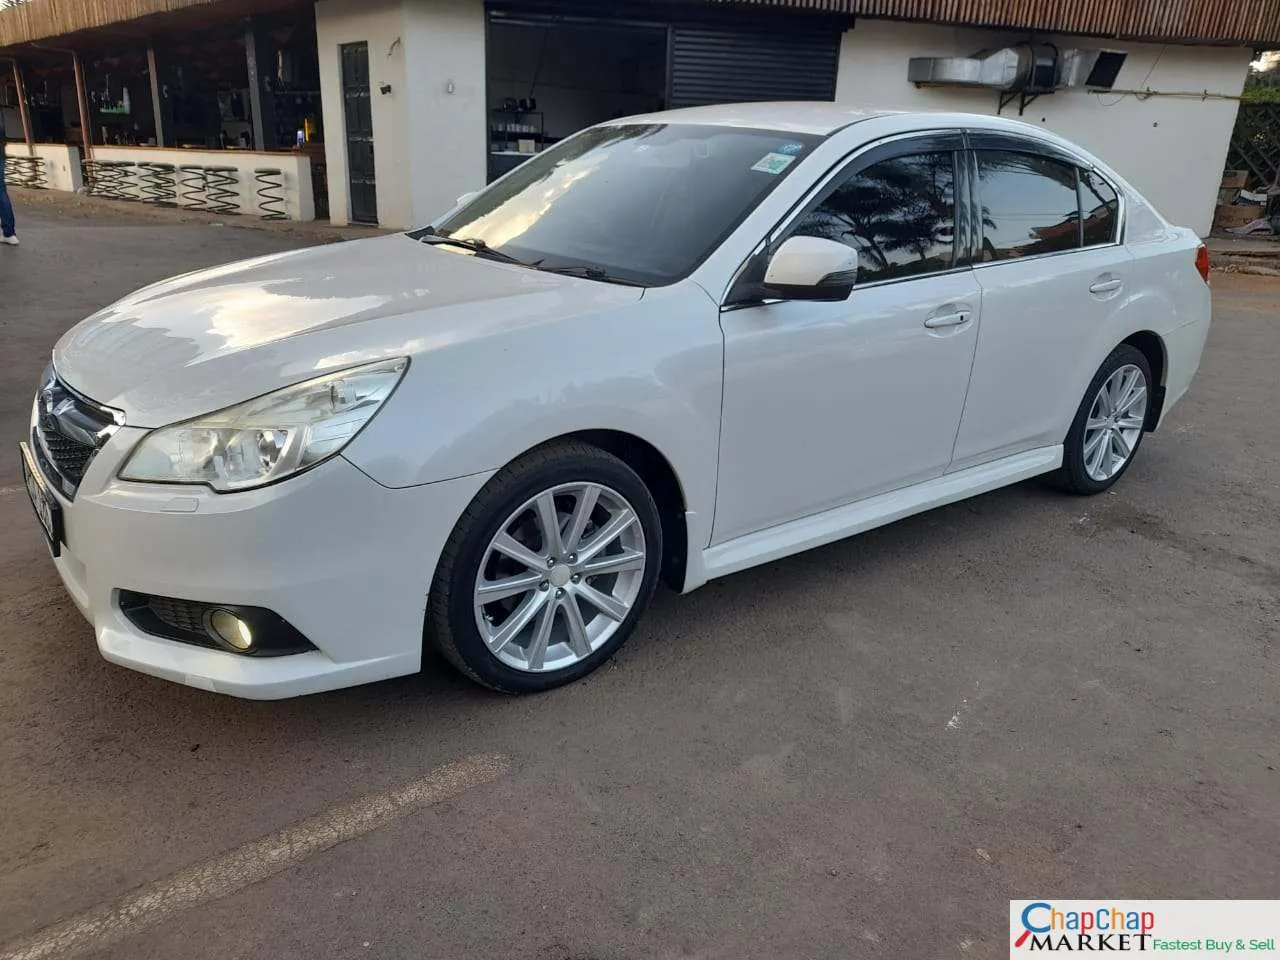 Subaru legacy saloon New shape You Only pay 30% Deposit Trade in Ok for sale in kenya hire purchase installments EXCLUSIVE bmm